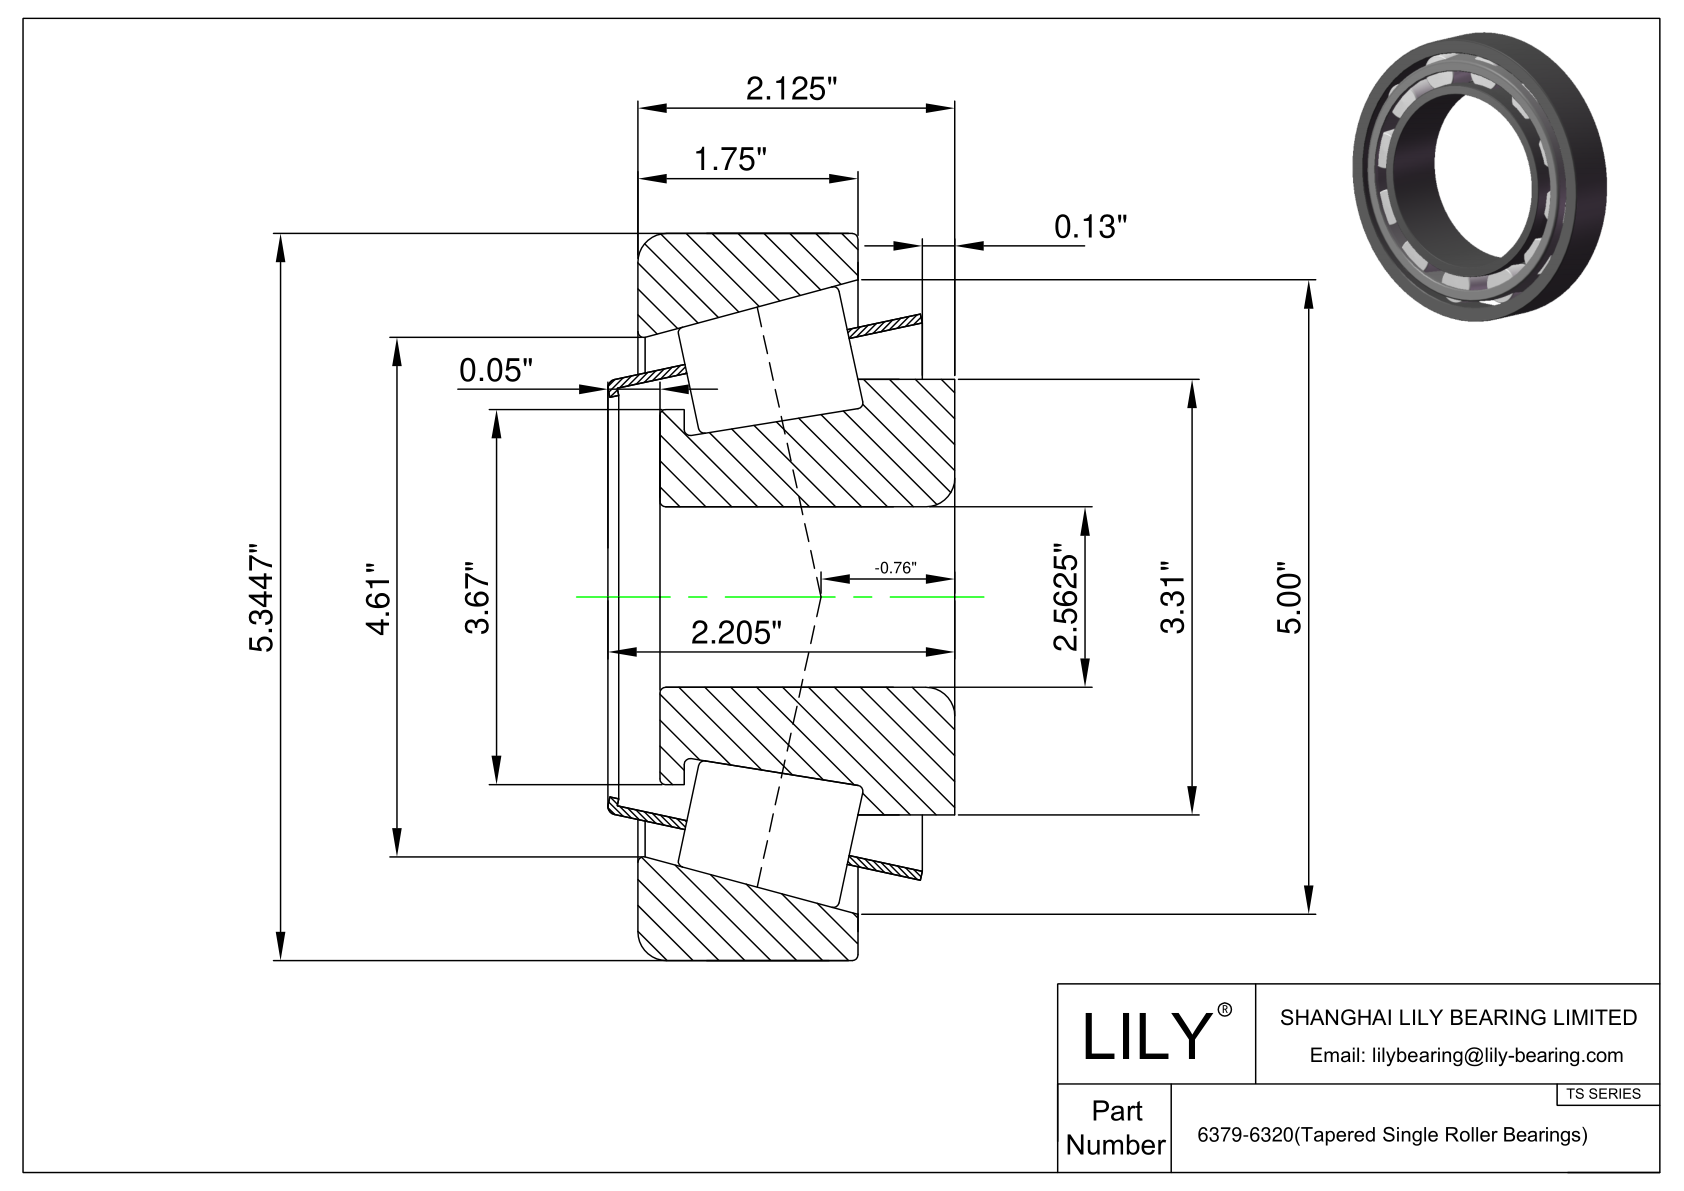 6379-6320 TS (Tapered Single Roller Bearings) (Imperial) cad drawing